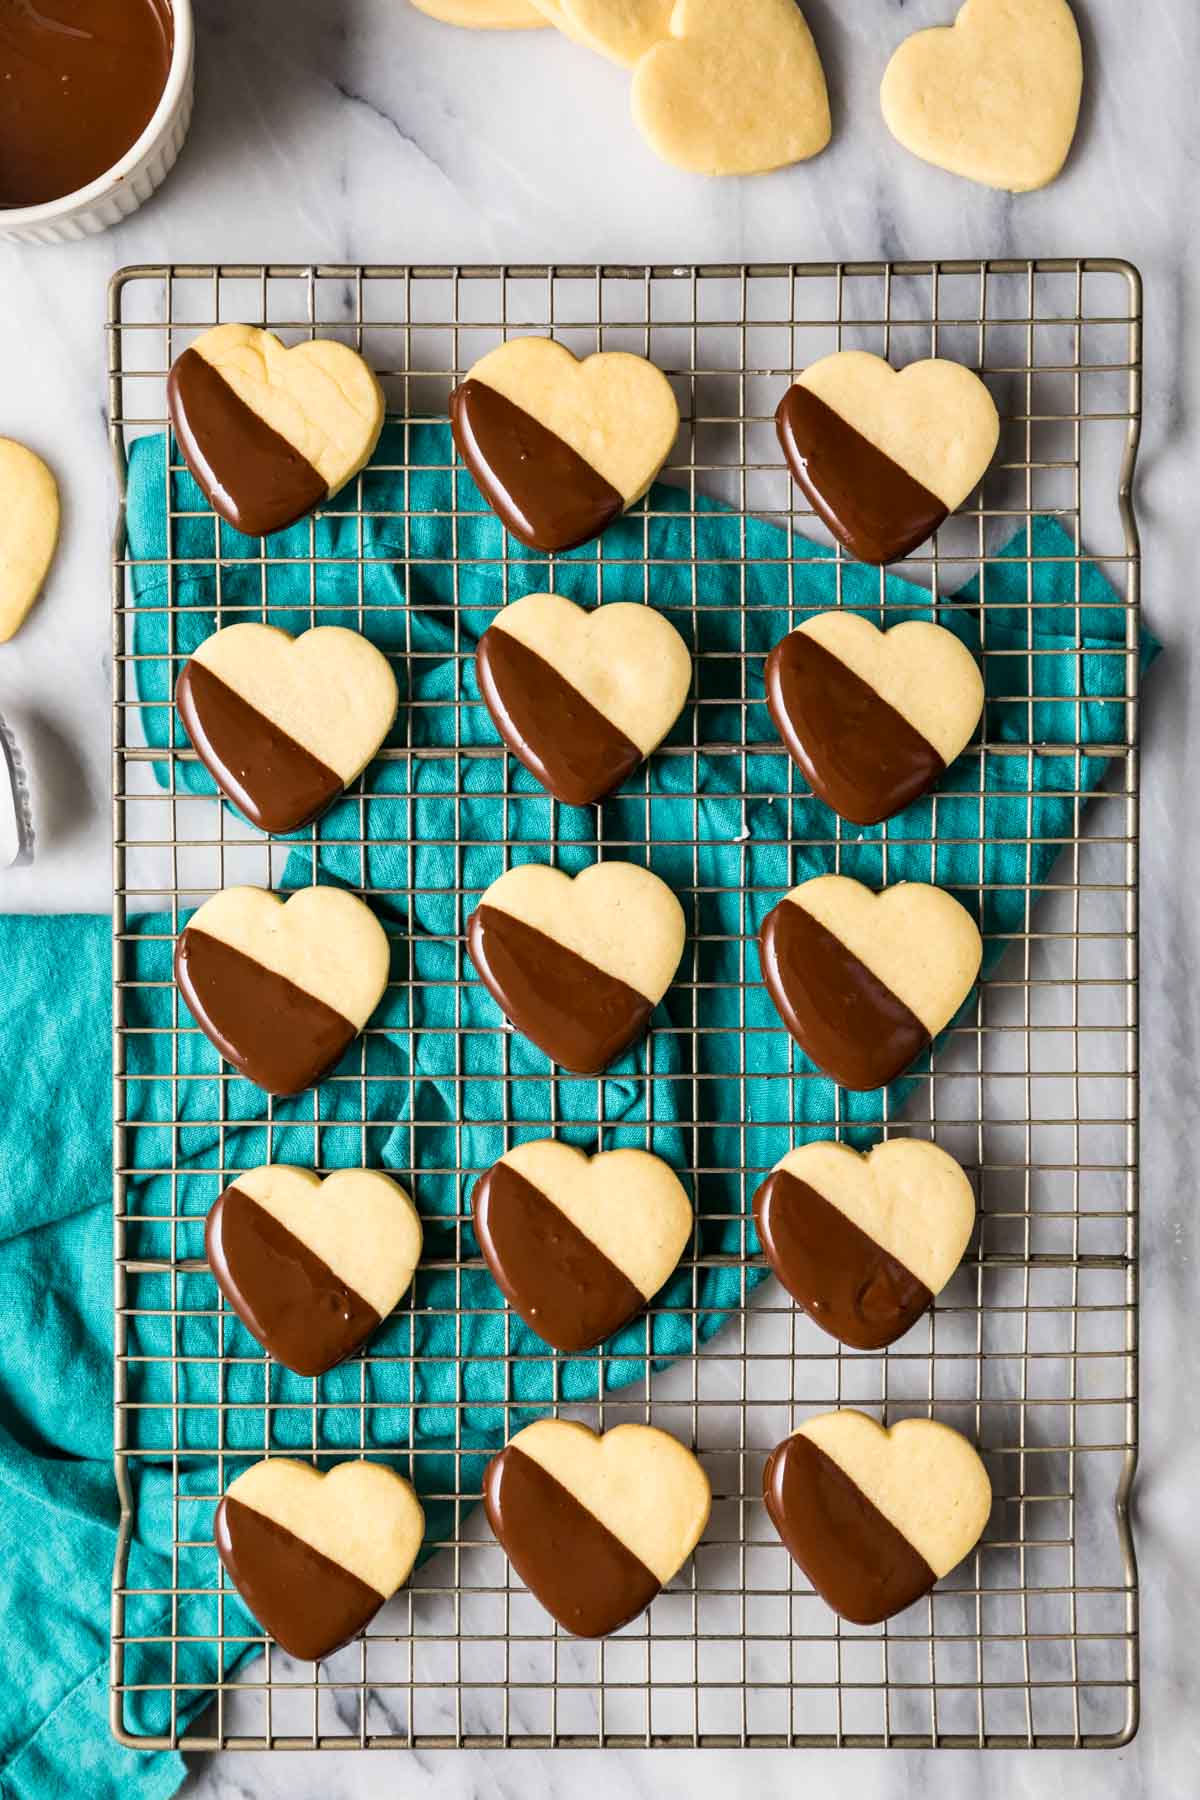 Overhead view of heart shaped shortbread cookies half dipped in chocolate on a cooling rack.